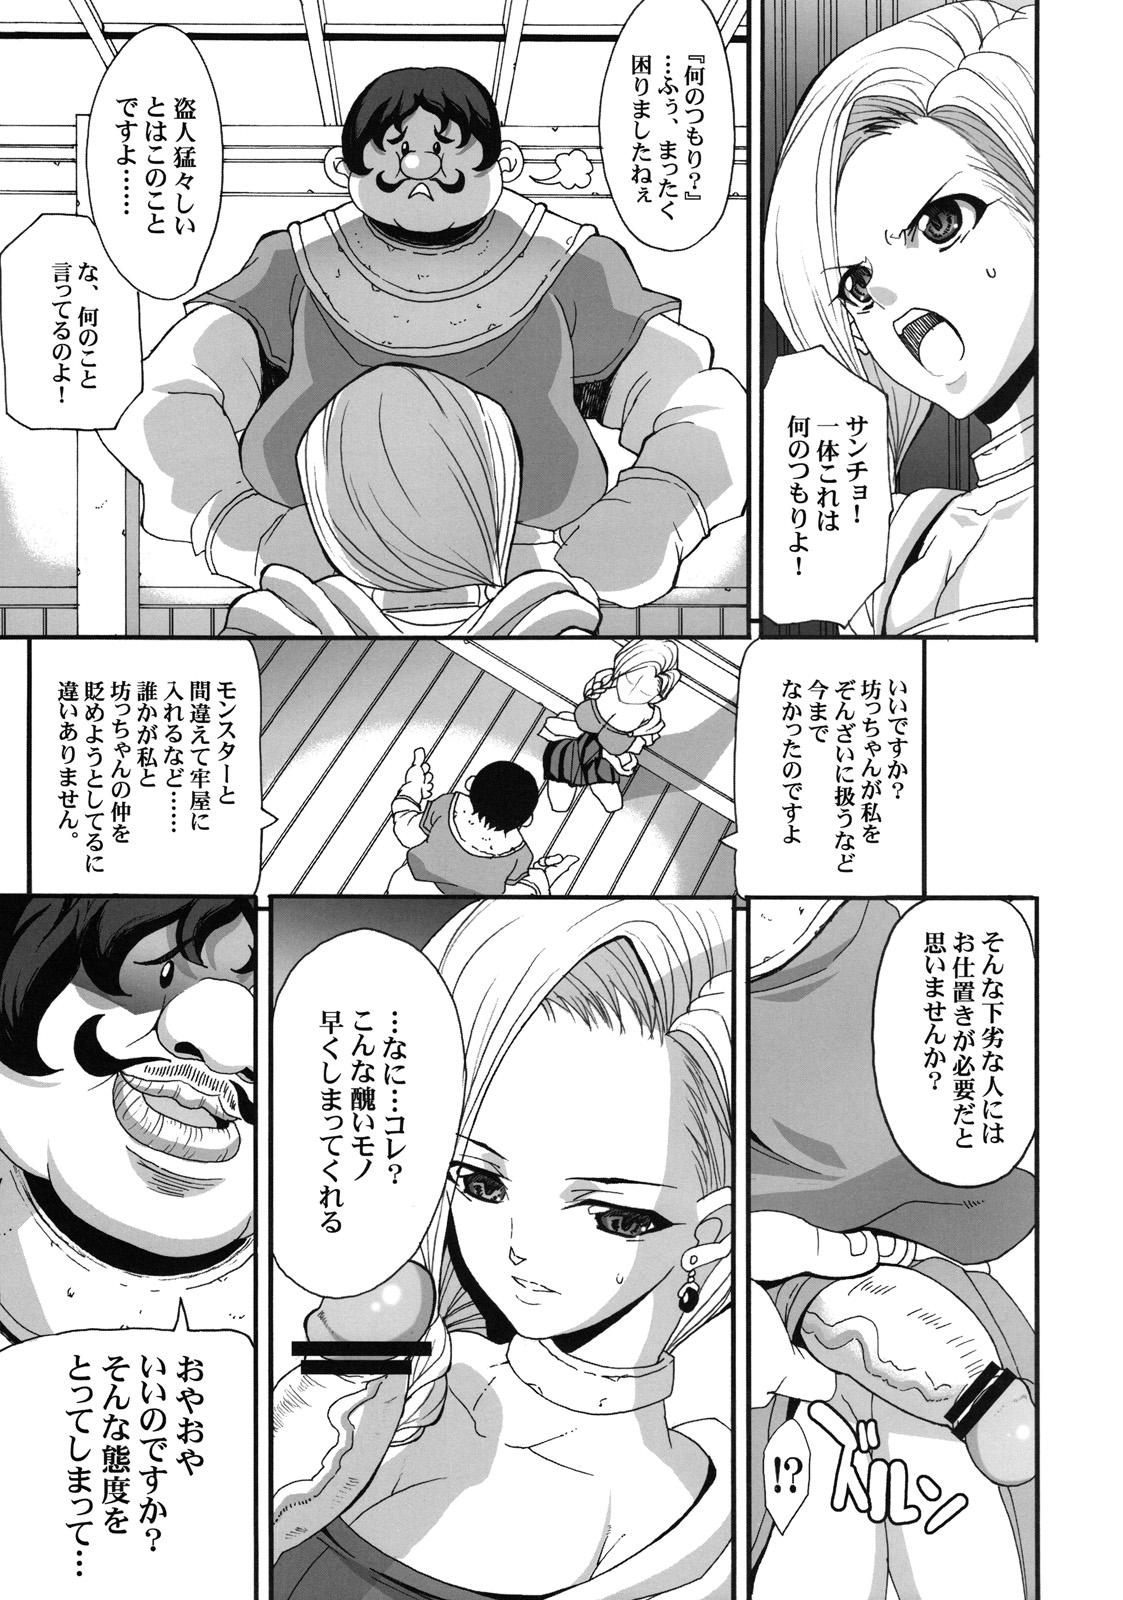 1080p The Sancho - Dragon quest v Fucking Sex - Page 7